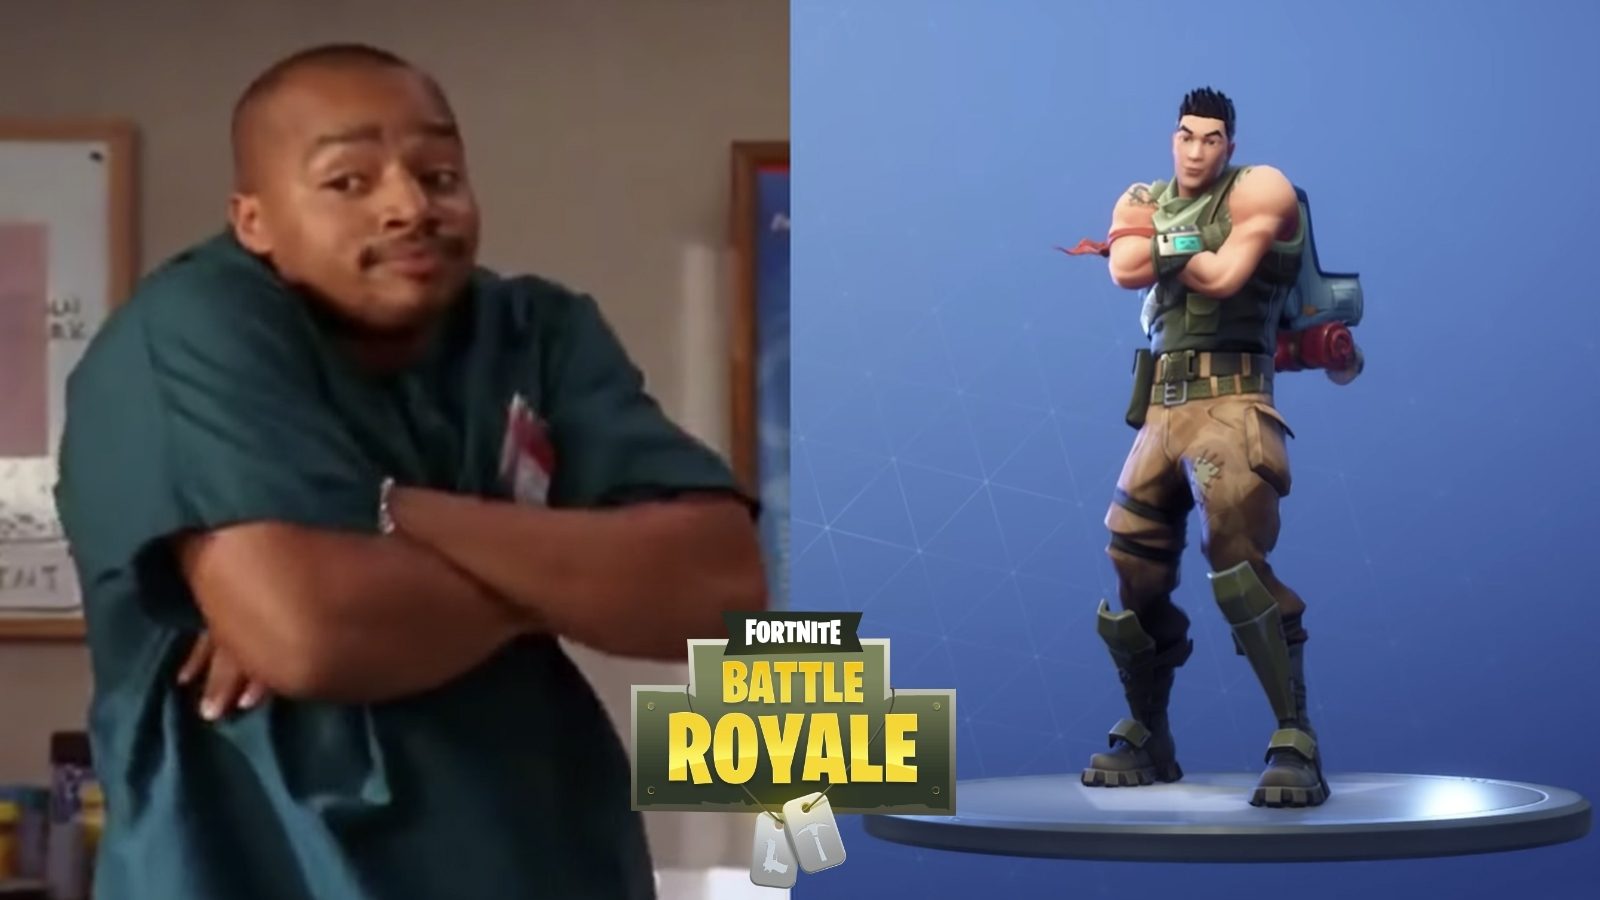 in the tv show turk uses certain dance moves to the music of poison by bell biv devoe when he was asked to demonstrate the move at the event he declined - fortnite dance news